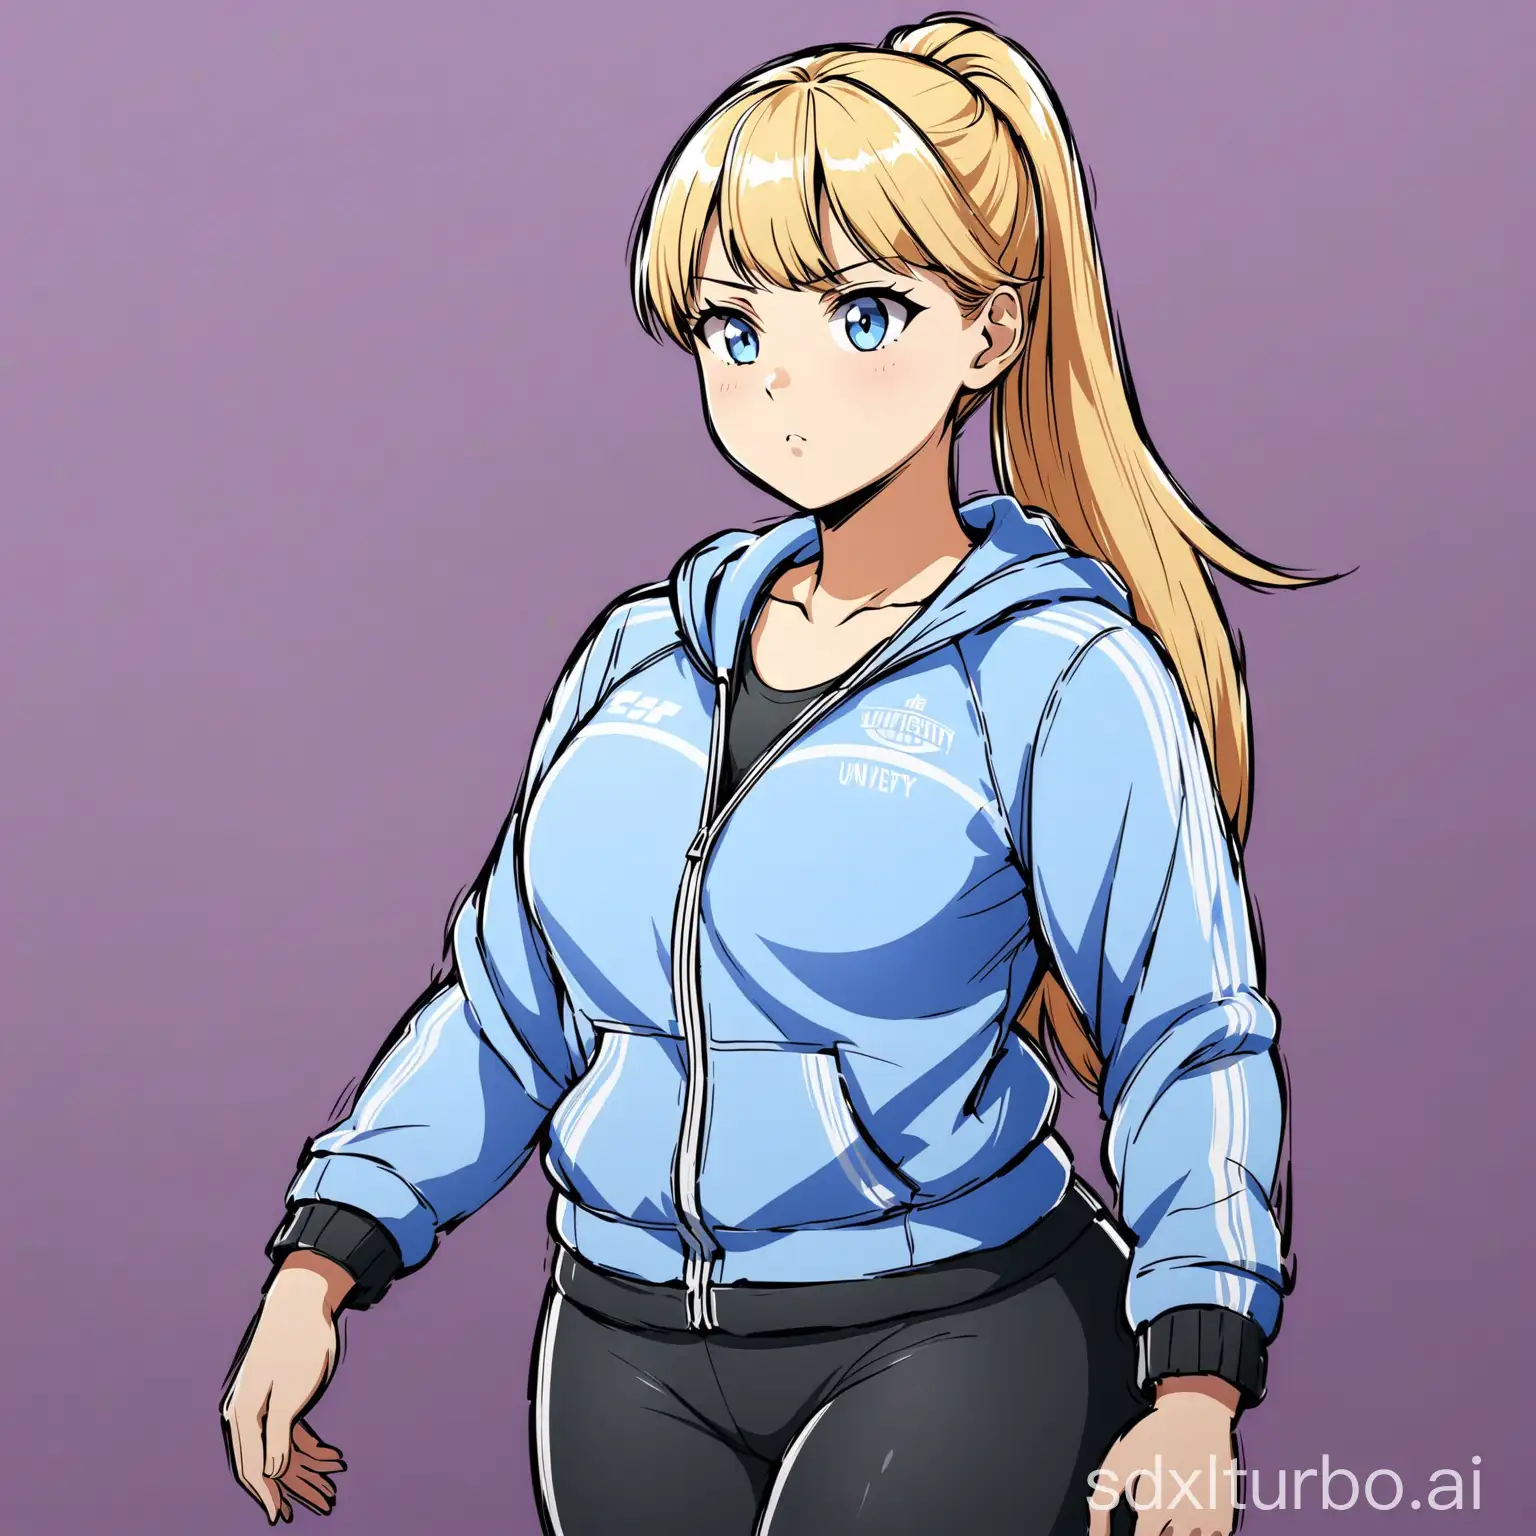 A scandinavian thin low stature blonde teen girl, with curvy long hair, with bangs and pony tail, blue eyes, with grey-violet university jacket, doing gym exercises, serious face